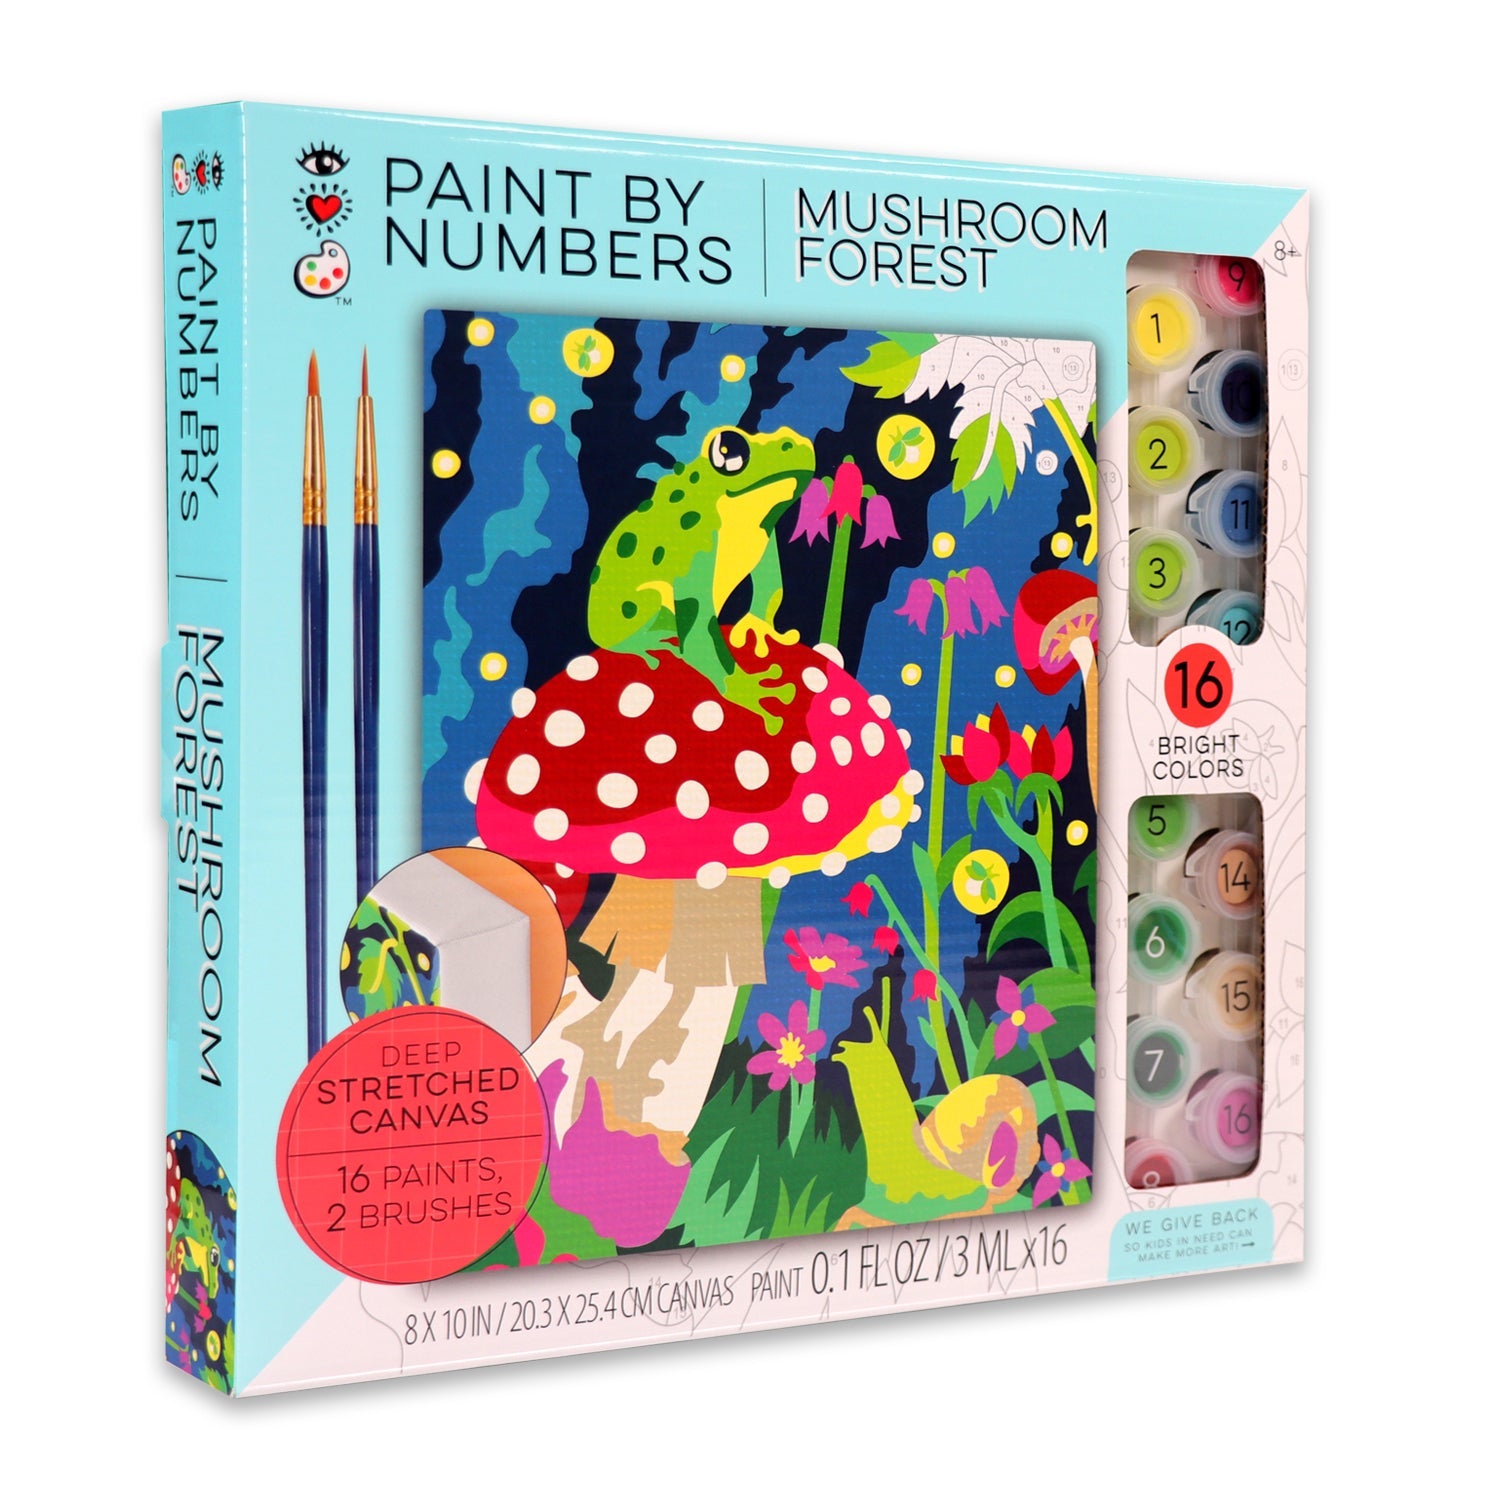 Paint by Numbers - Mushroom Forest